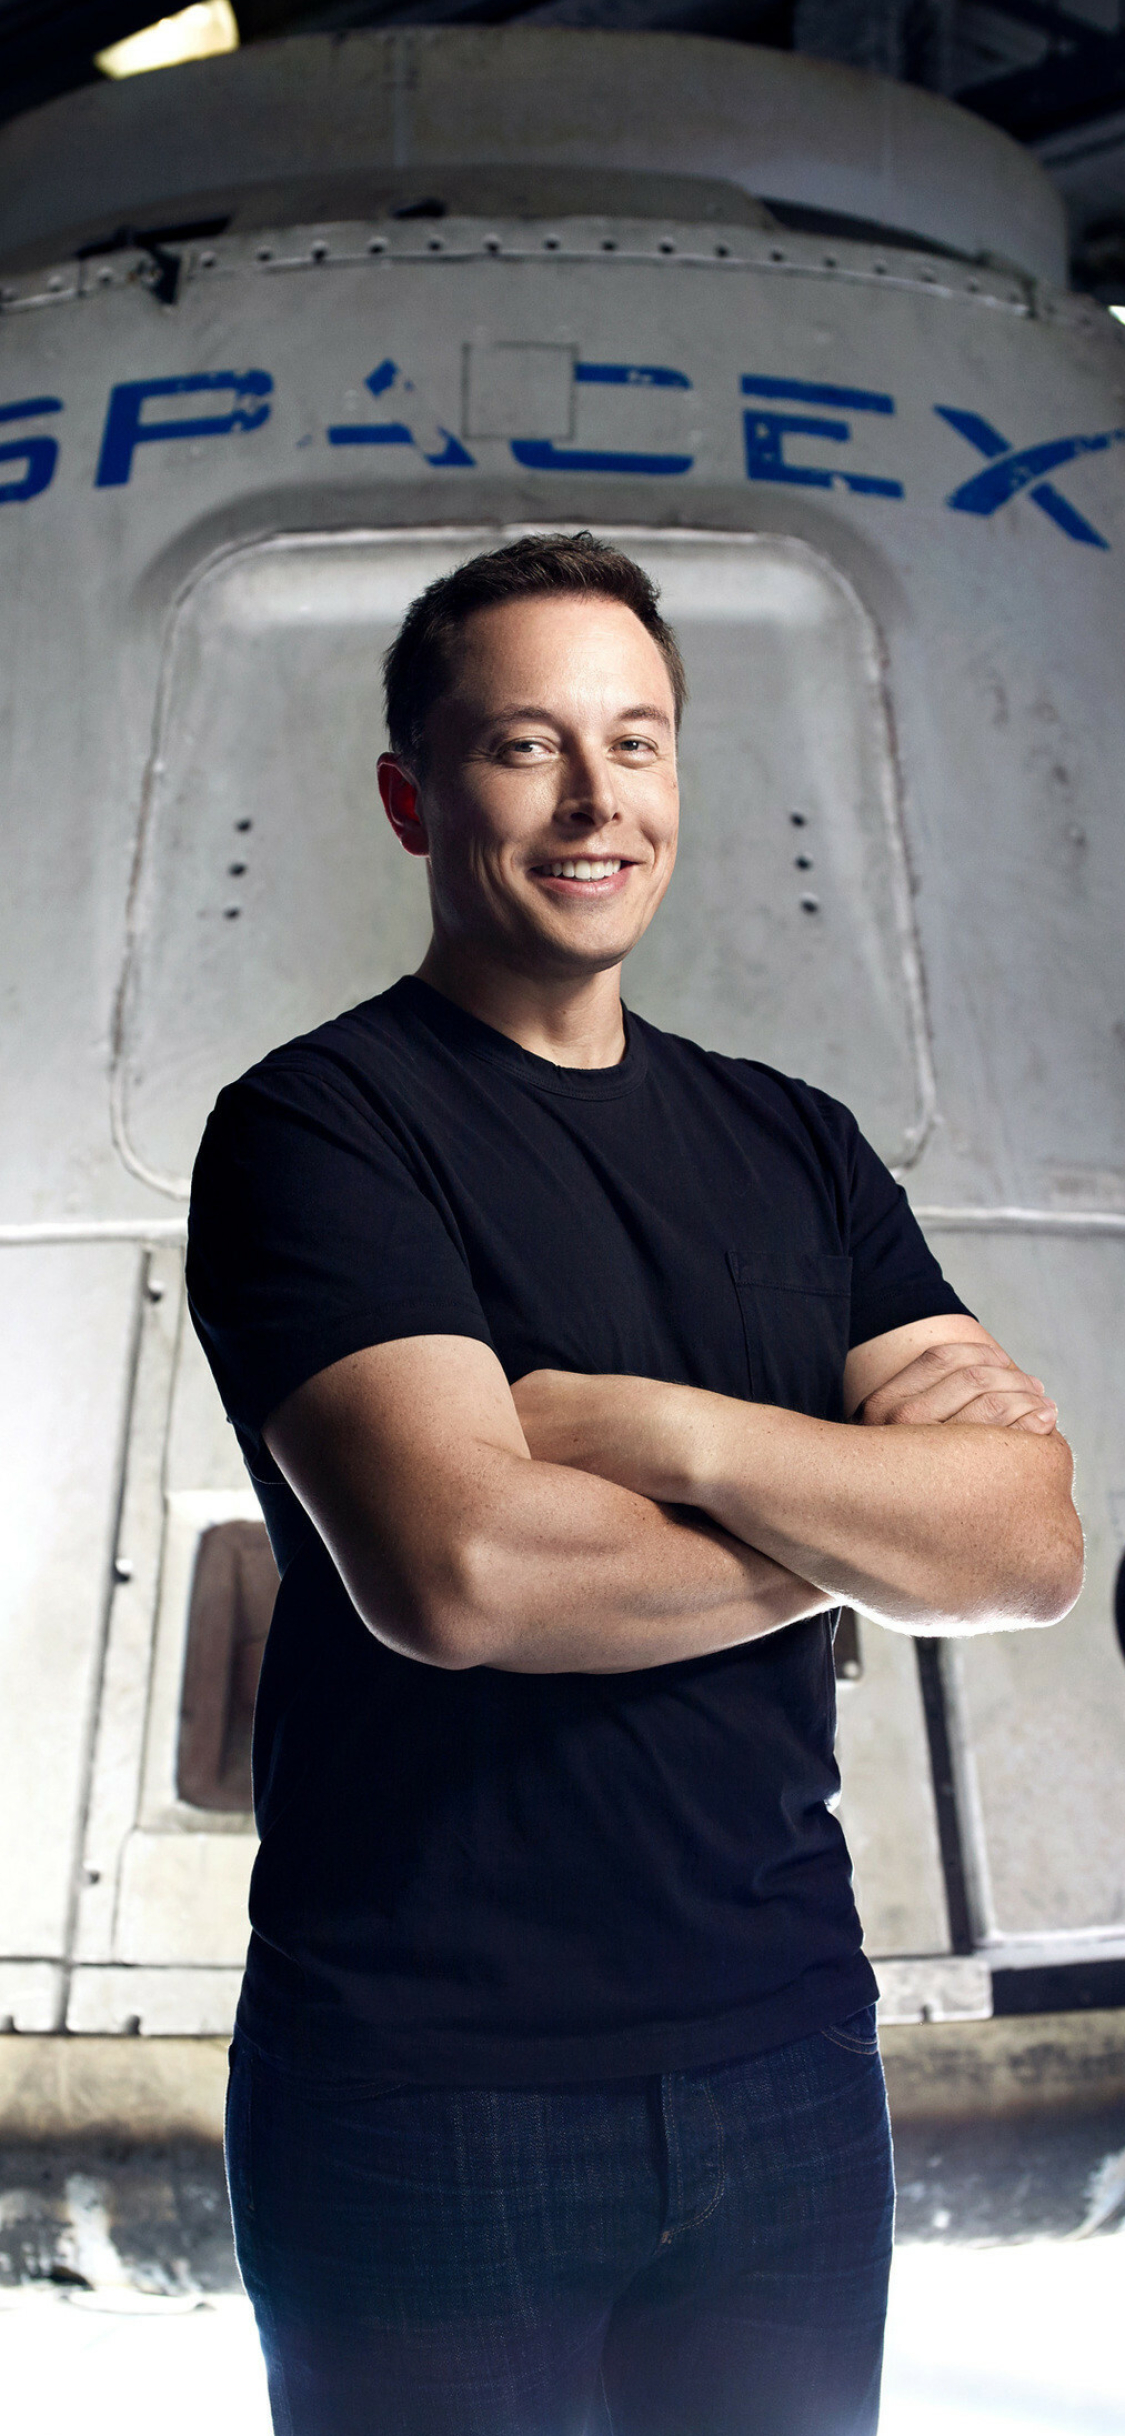 Elon Musk: Known for being the founder and chief executive of SpaceX and Tesla Inc. 1130x2440 HD Background.